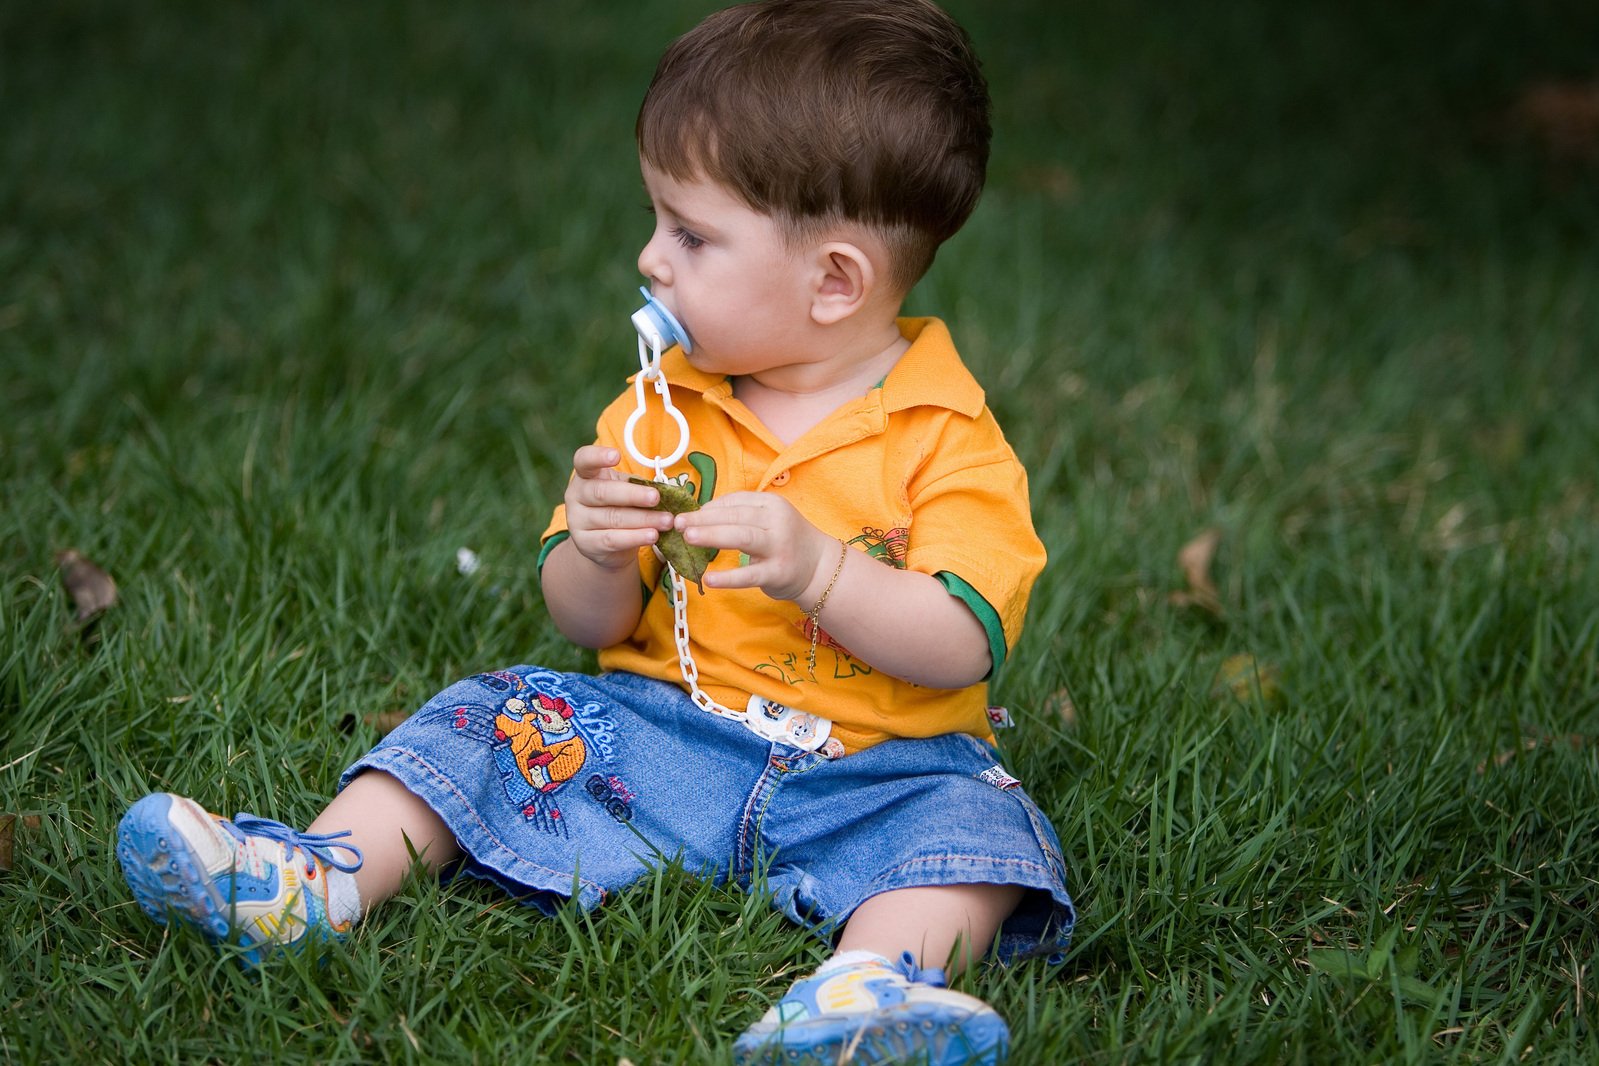 a young child sits in the grass eating soing